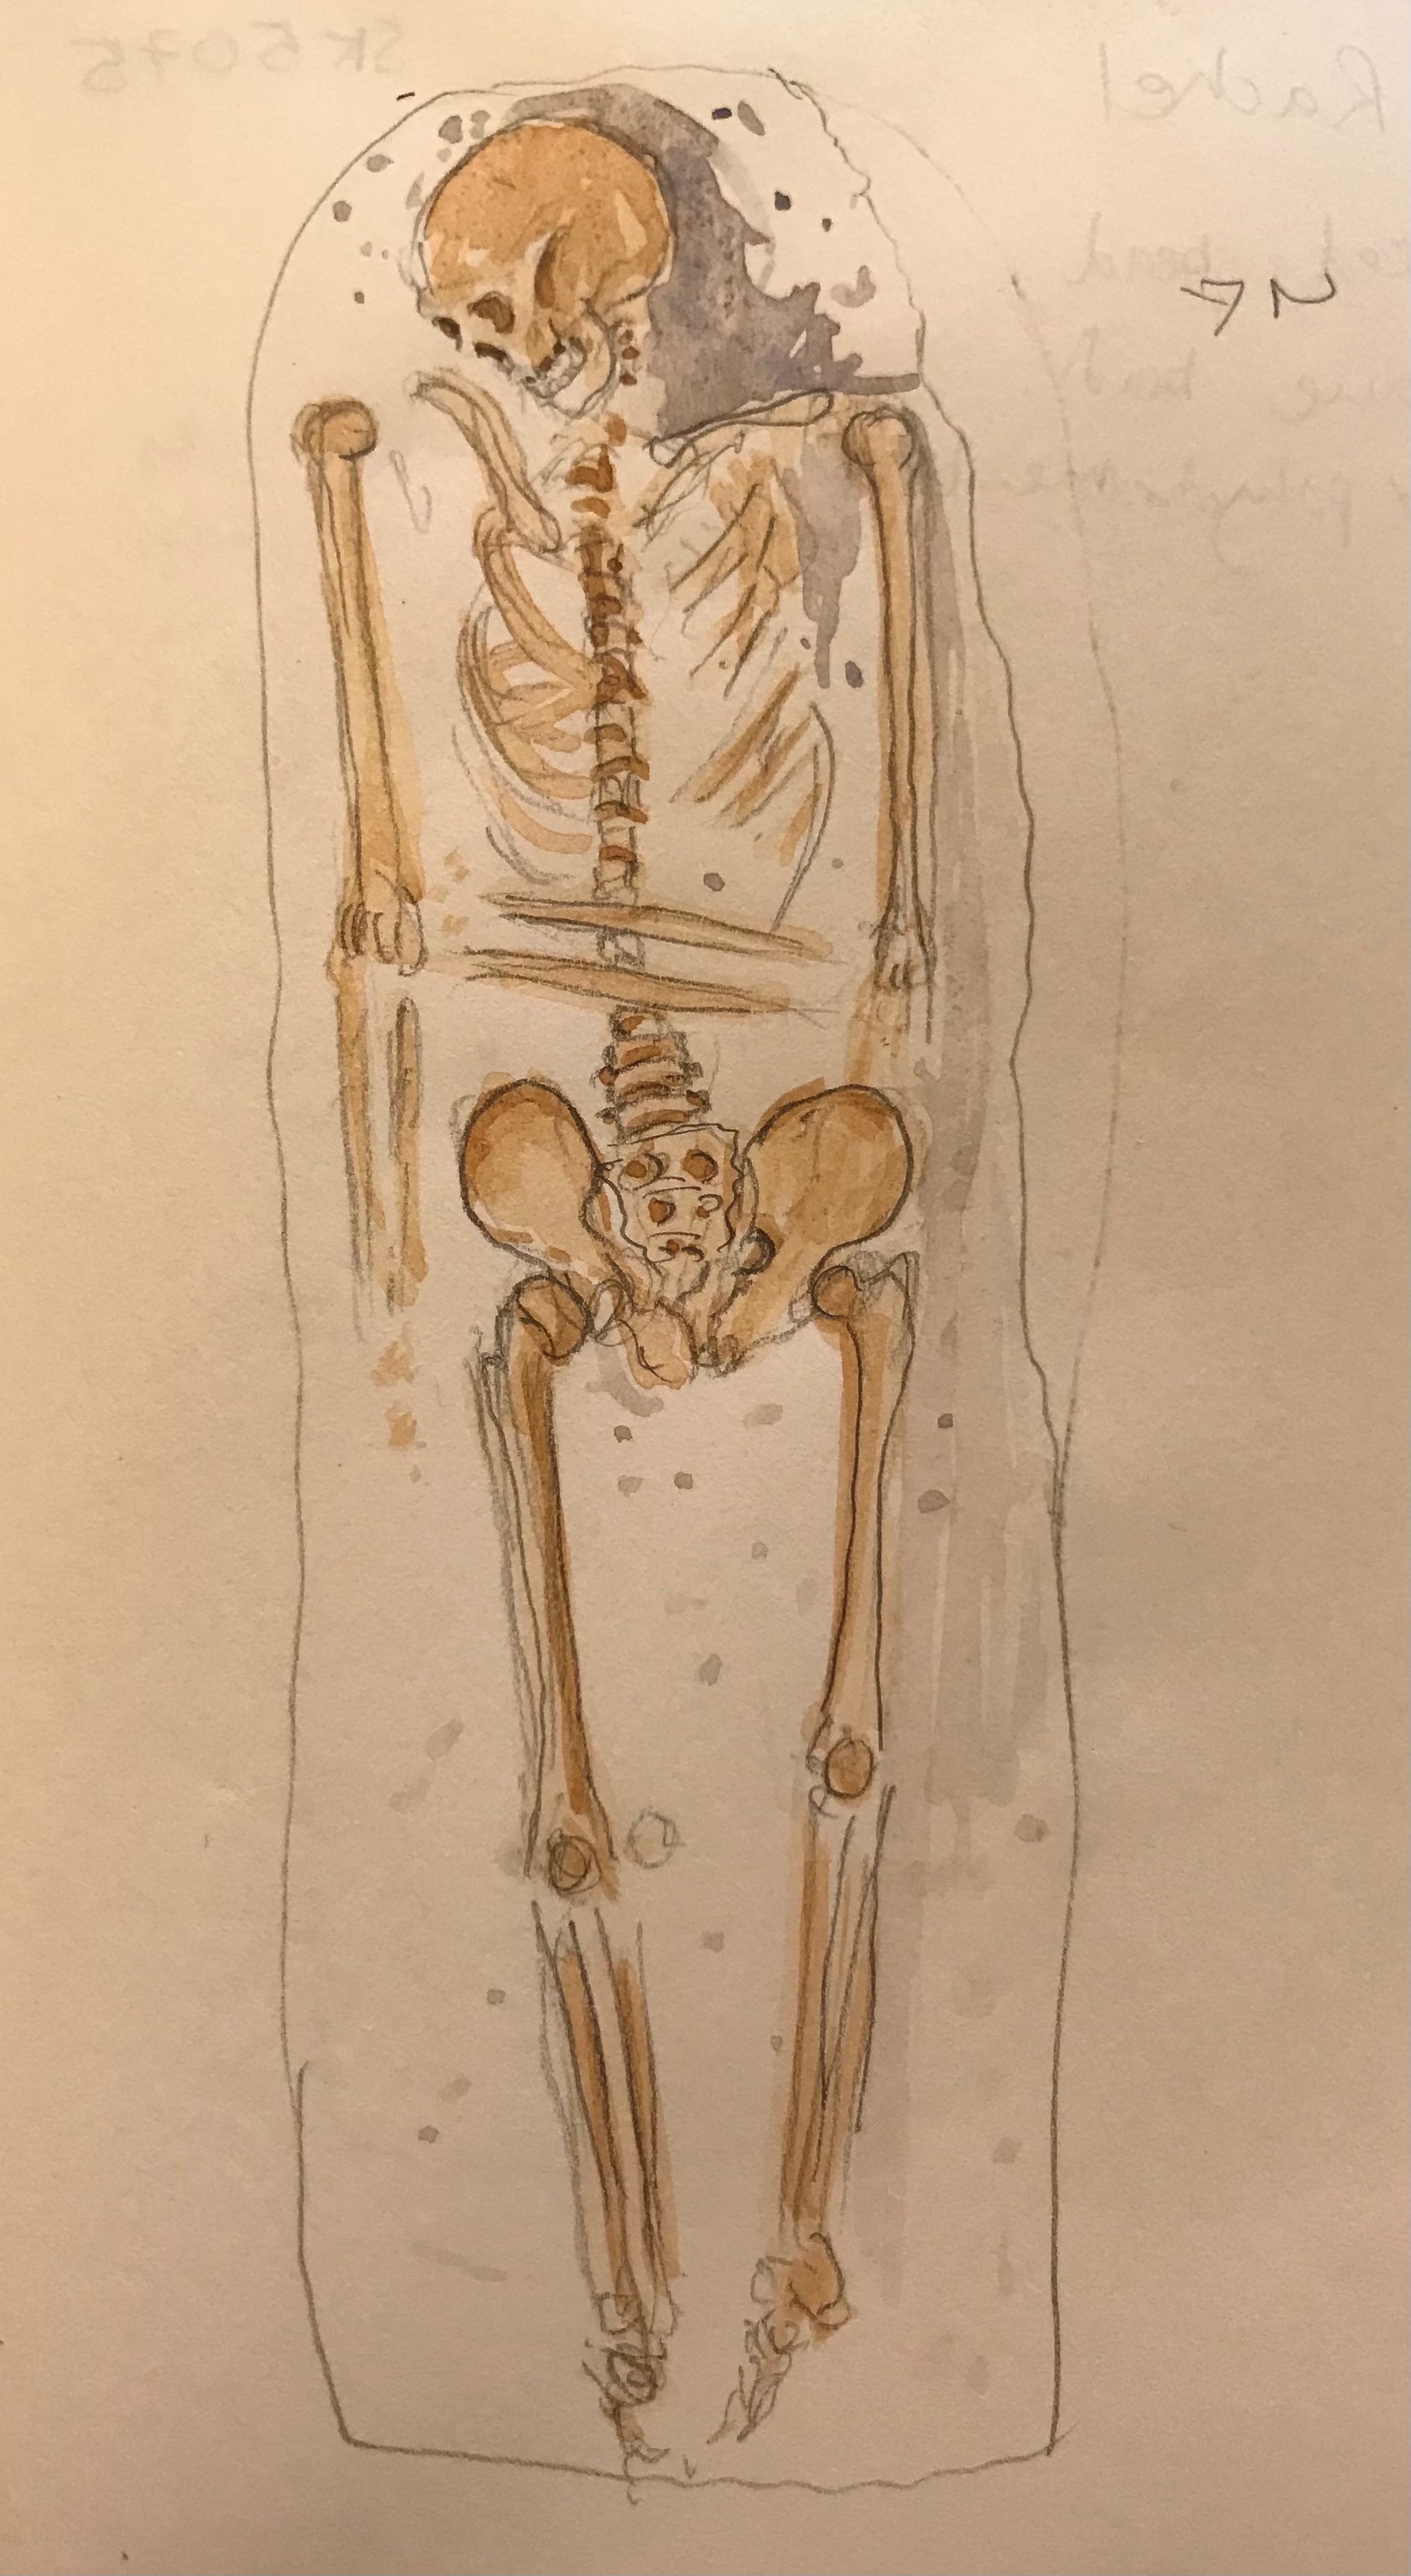 A watercolour drawing of a skeleton